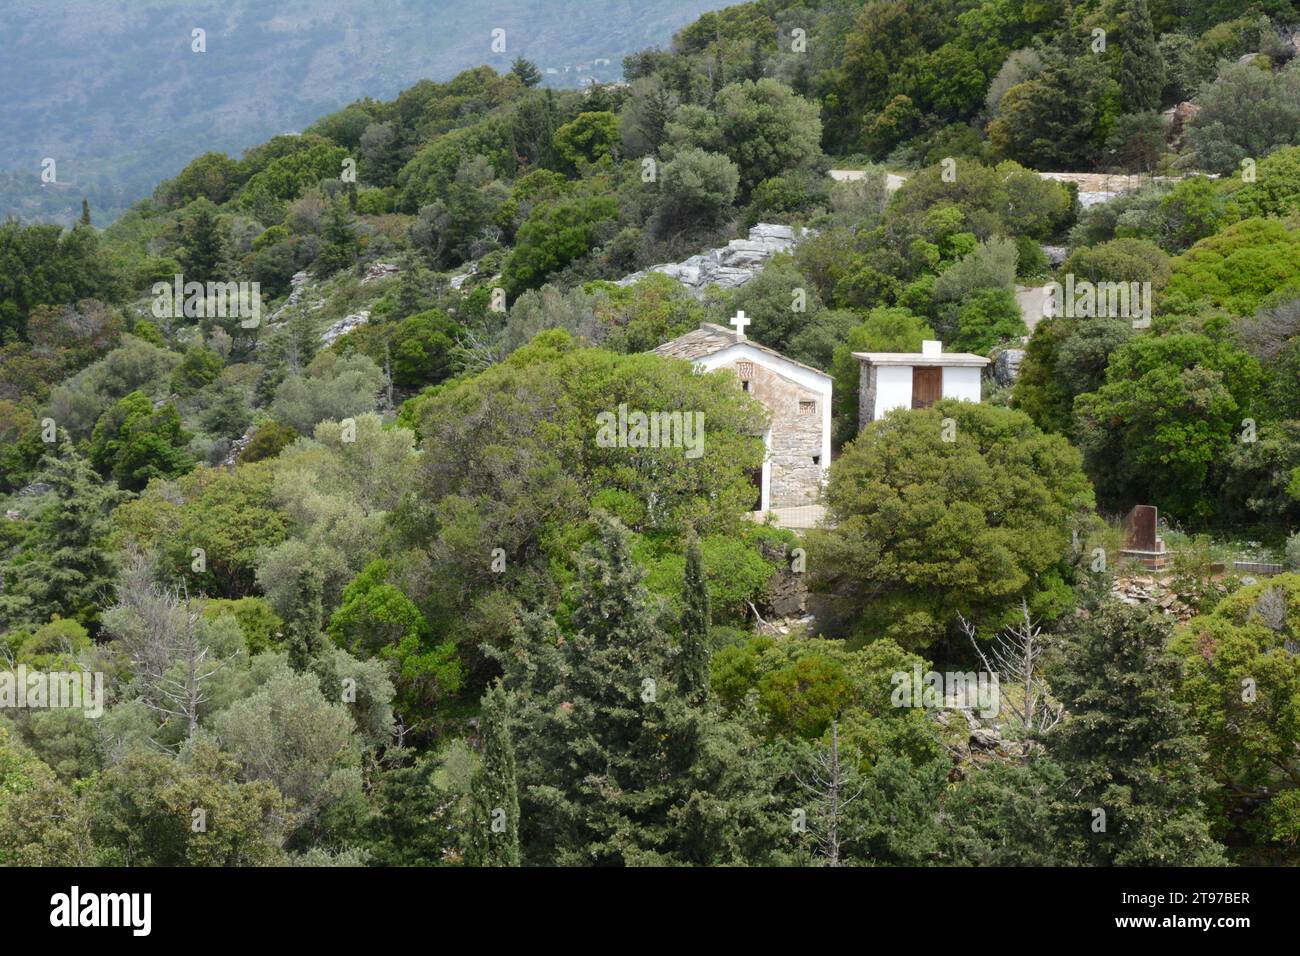 A small Orthodox Christian church or chapel located in the hills and forest above the town of Evdilos, on the Greek Island of Ikaria, Greece. Stock Photo